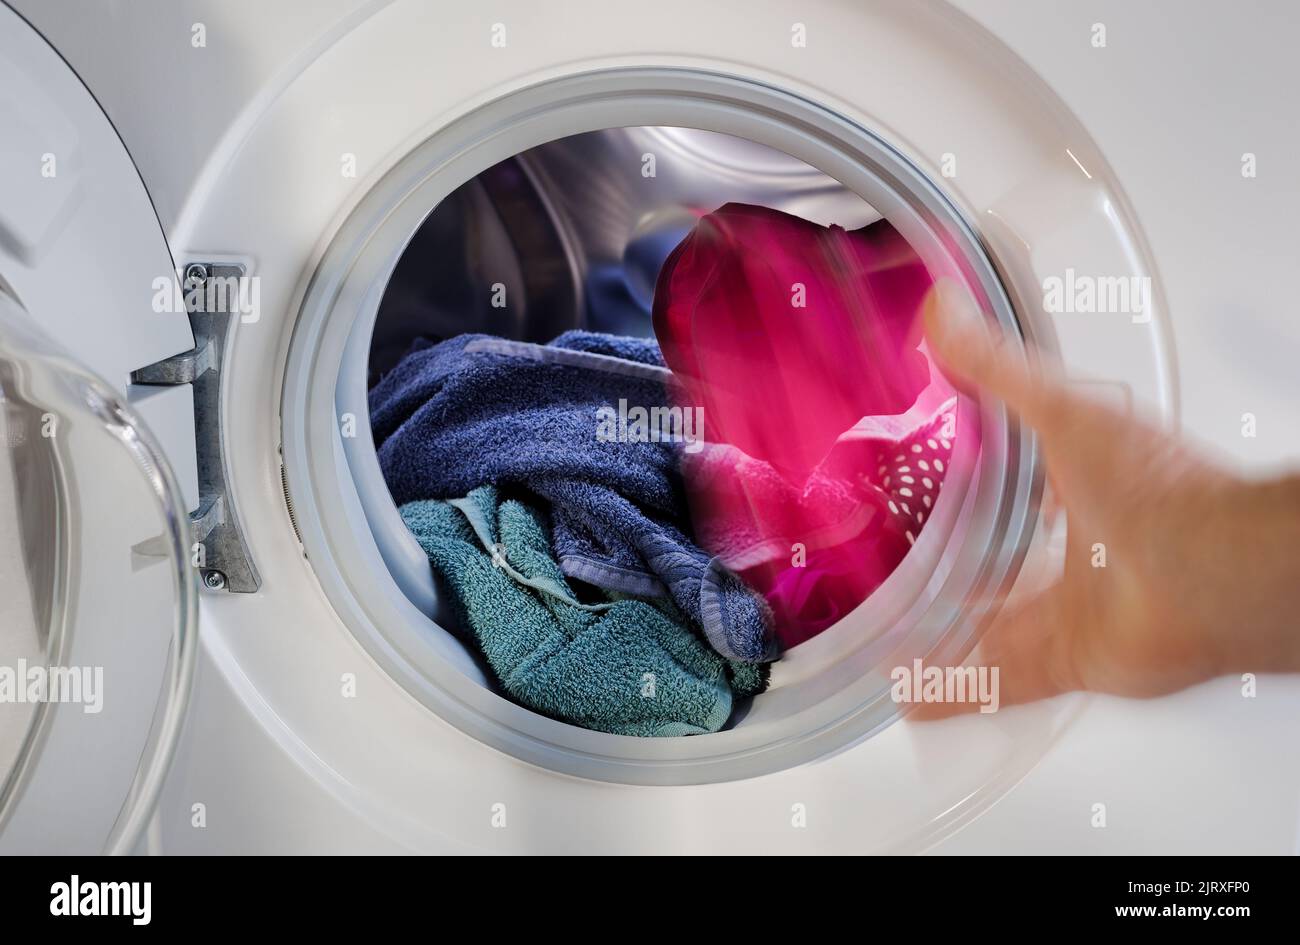 Filling coloureds clothes laundry in the washing machine, charging launder clothing items in the laundering washer Stock Photo